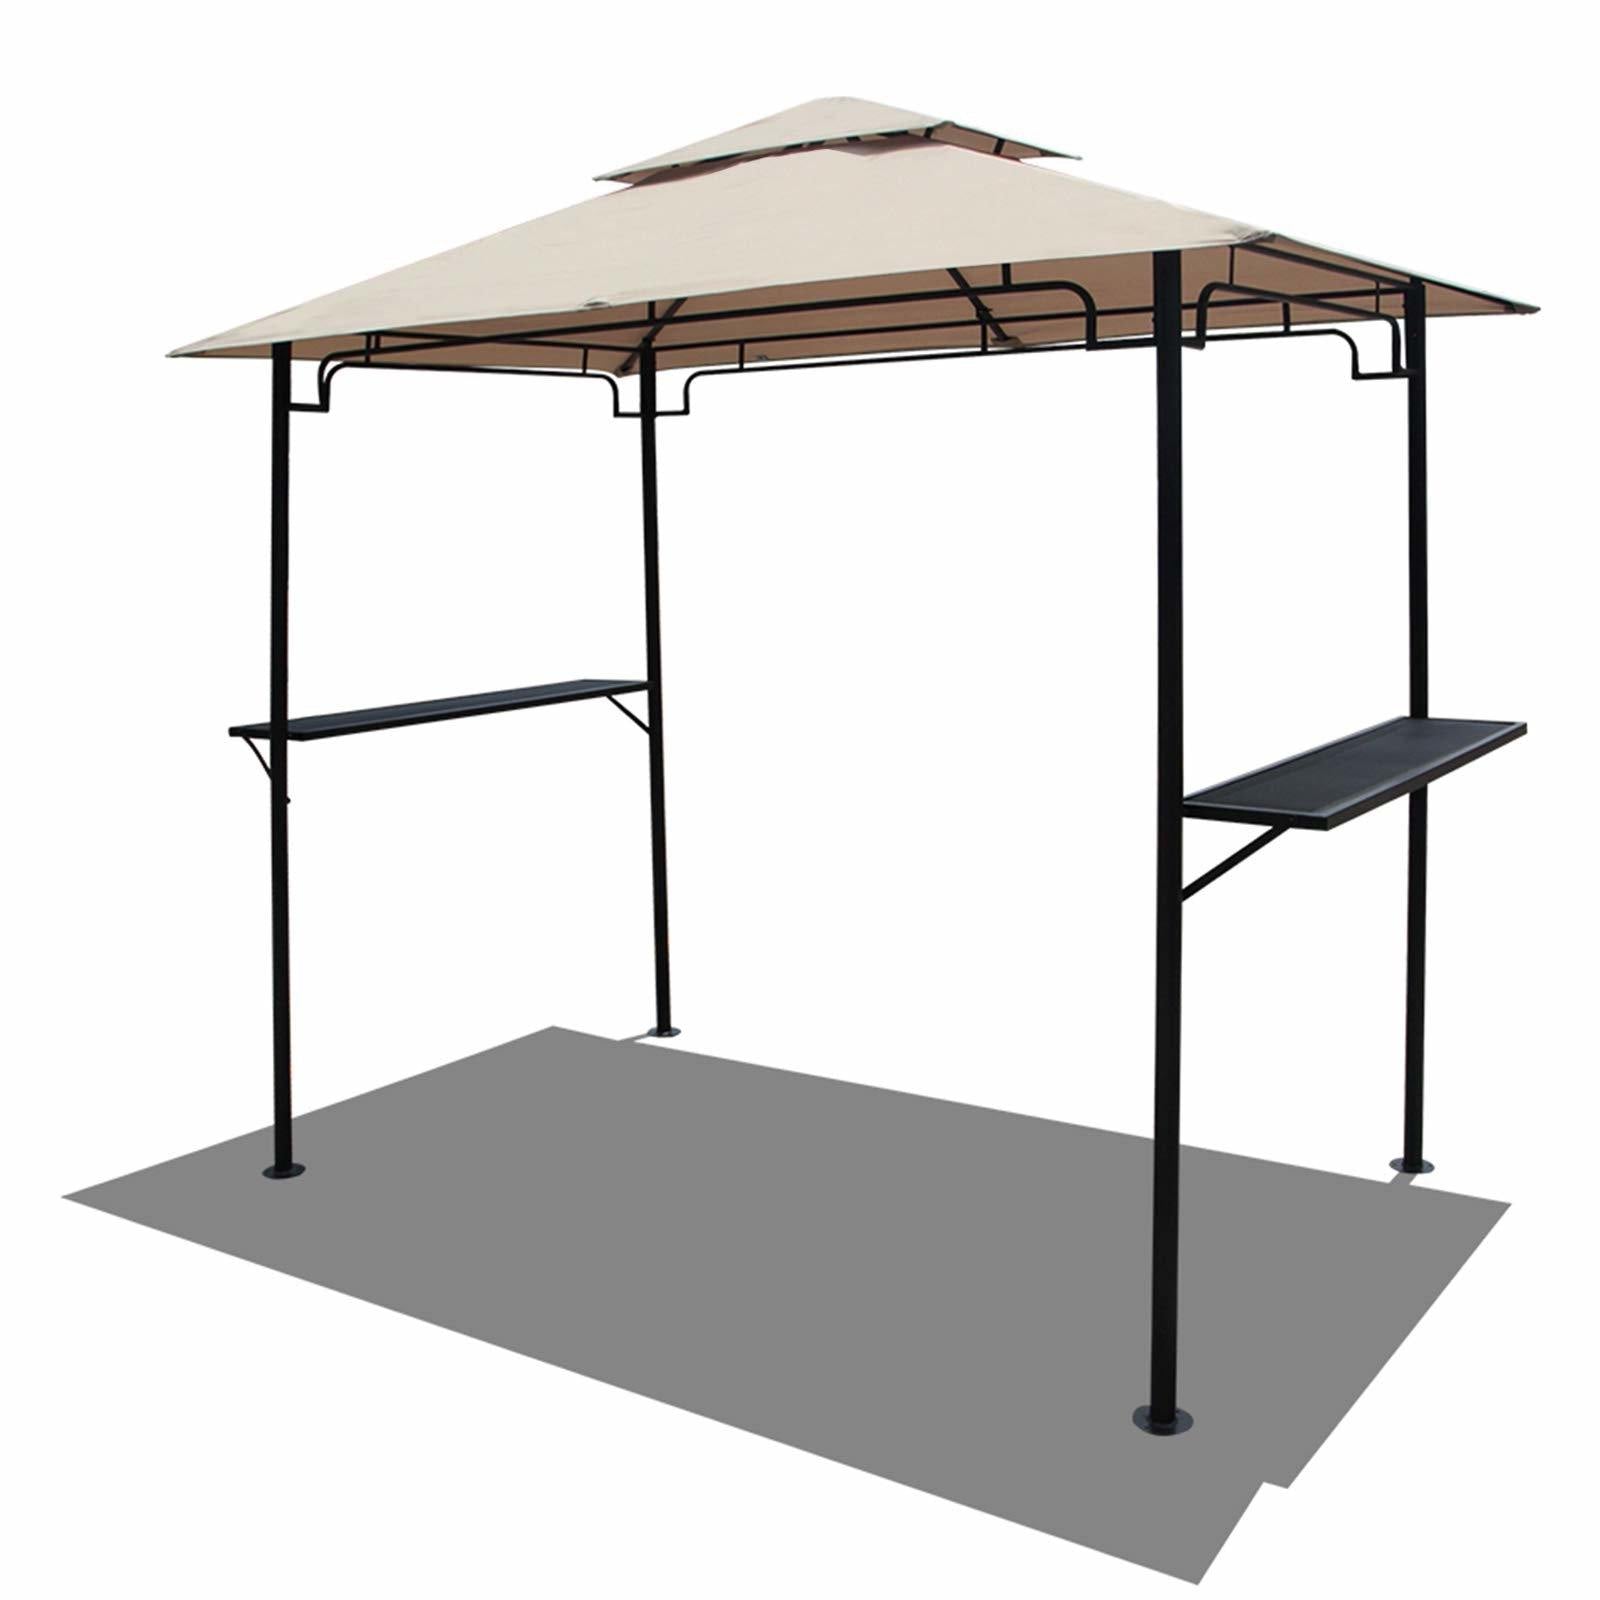 Grill Gazebo with Double-Tier Soft Polyester Top and Metal Shelves, 8' by 5', Beige | Orange-Casual